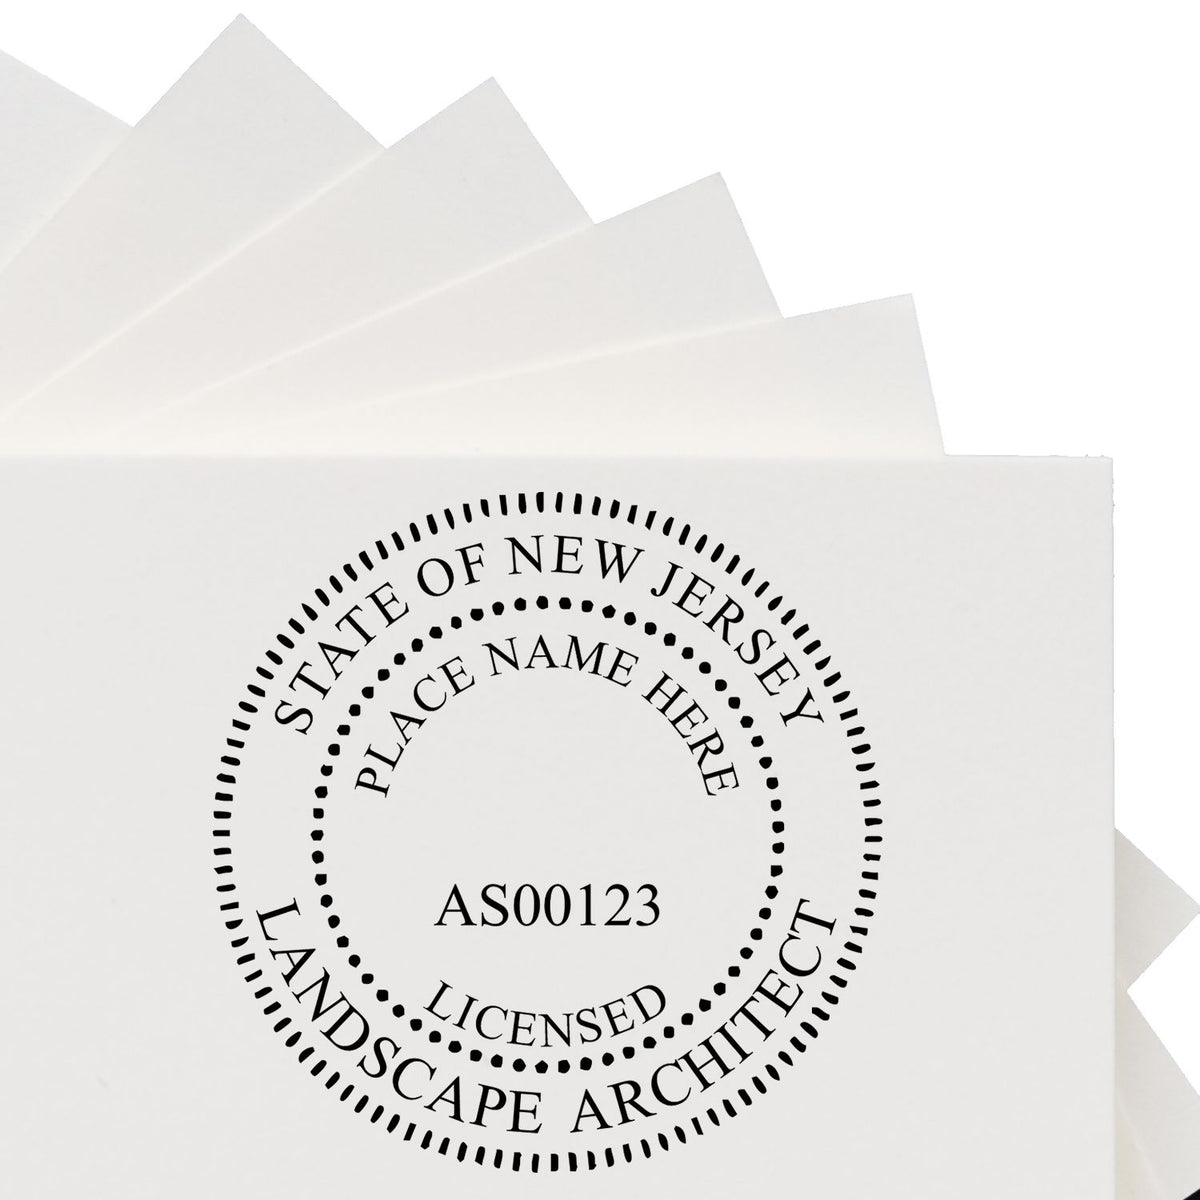 A photograph of the Self-Inking New Jersey Landscape Architect Stamp stamp impression reveals a vivid, professional image of the on paper.